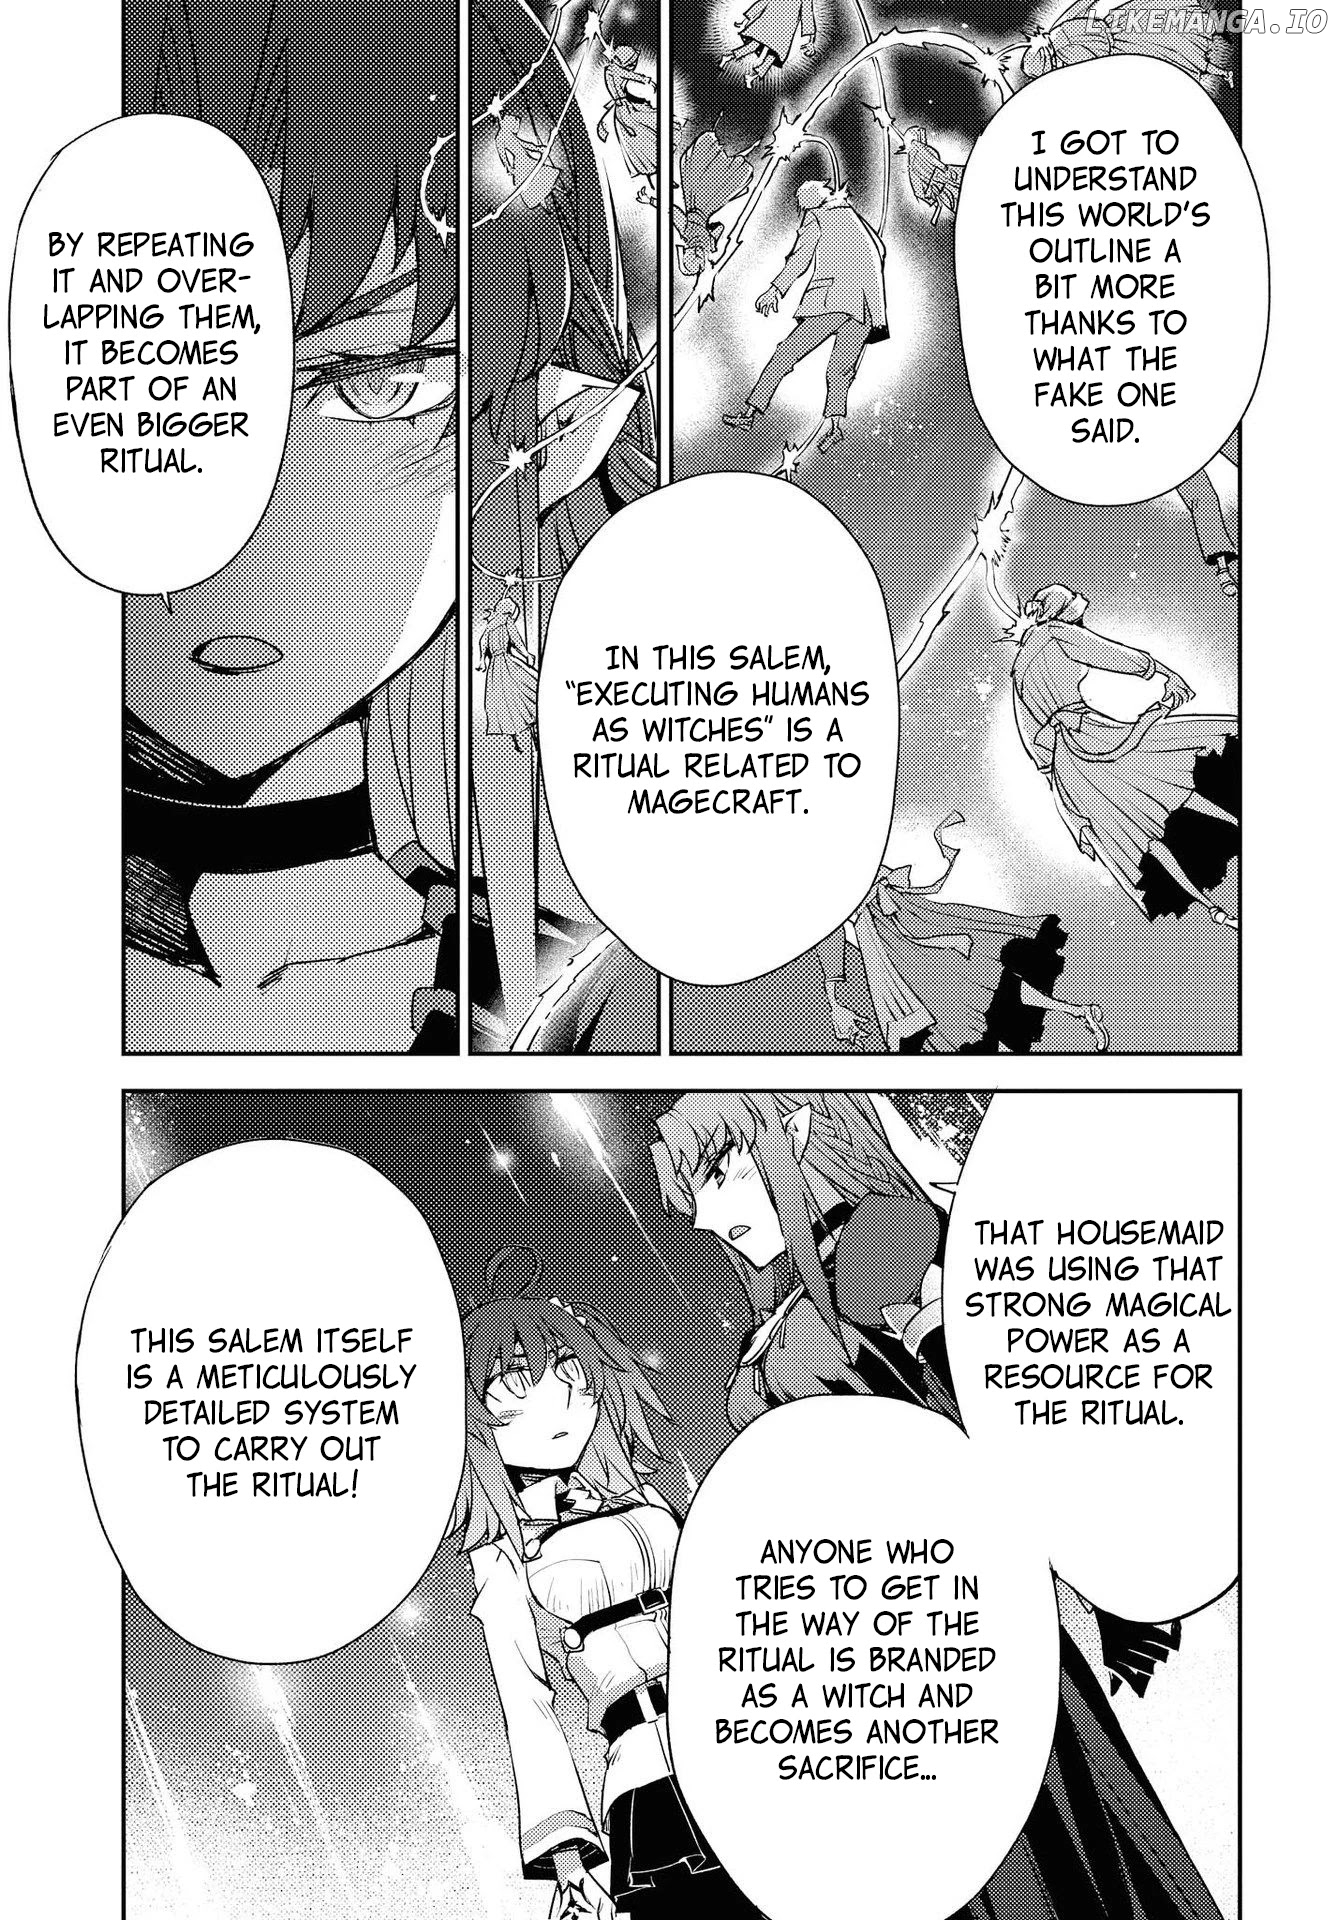 Fate/Grand Order: Epic of Remnant - Subspecies Singularity IV: Taboo Advent Salem: Salem of Heresy chapter 12 - page 5